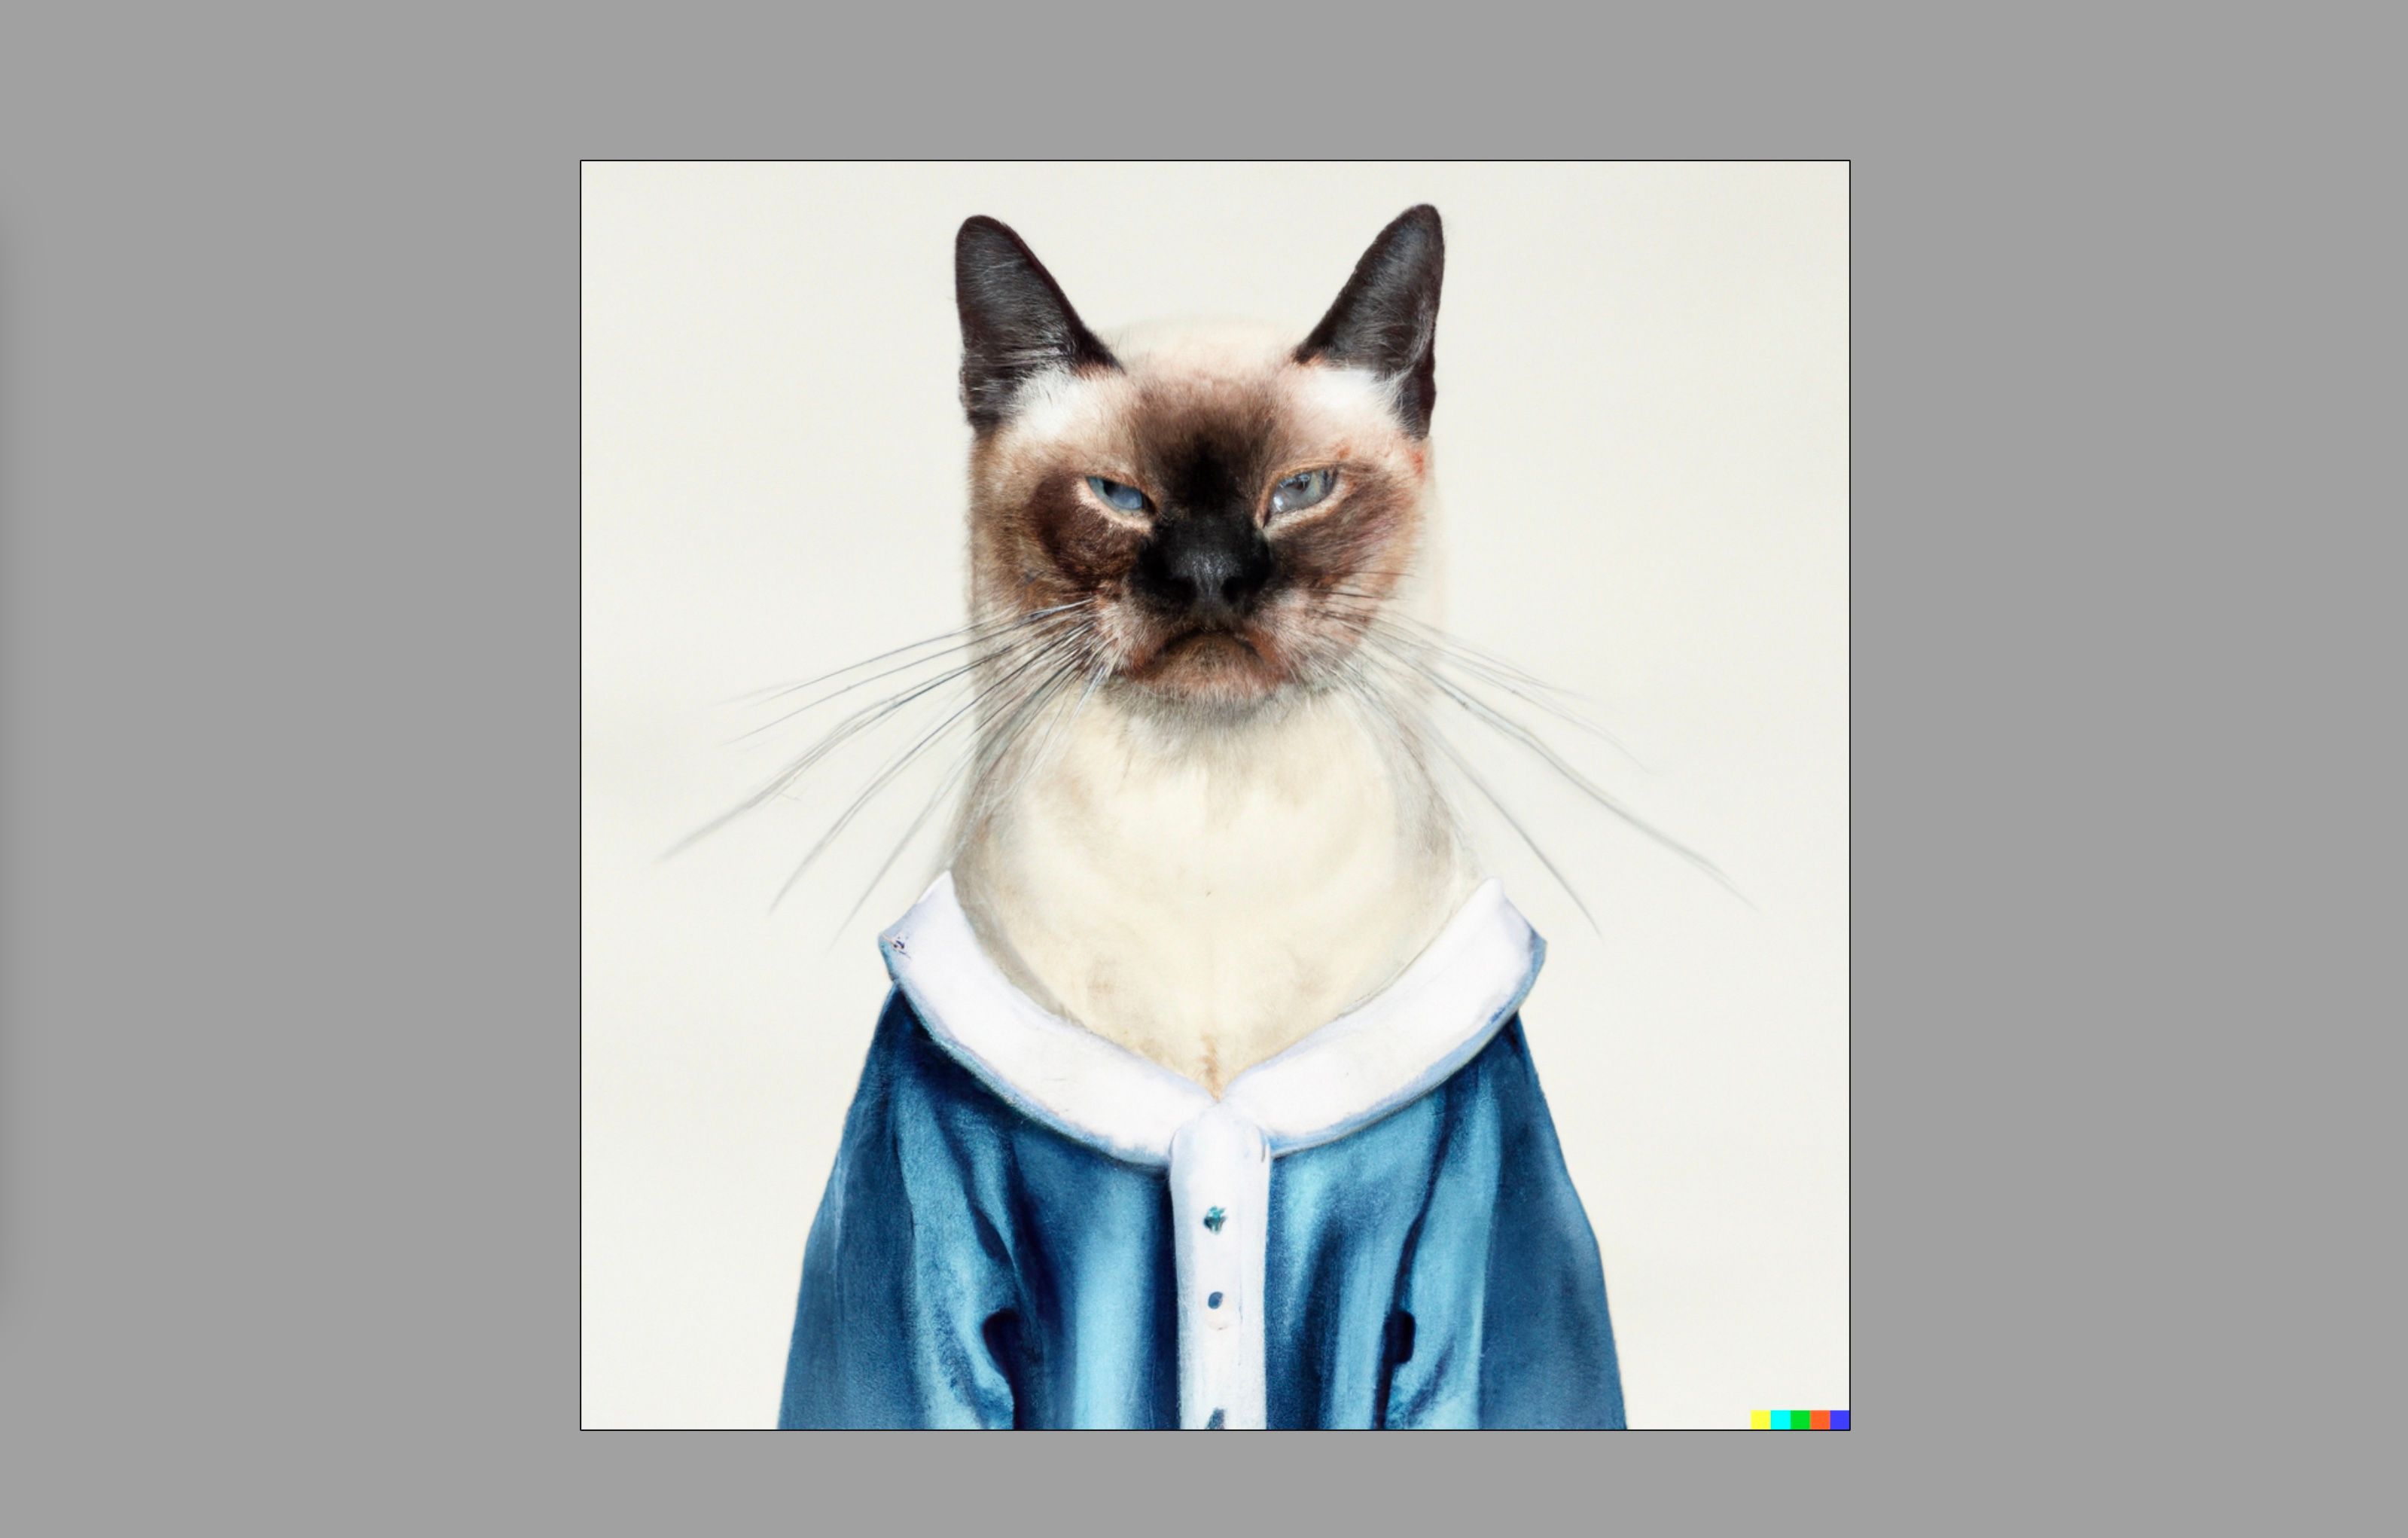 A siamese cat in a robe, generated with Dall-E